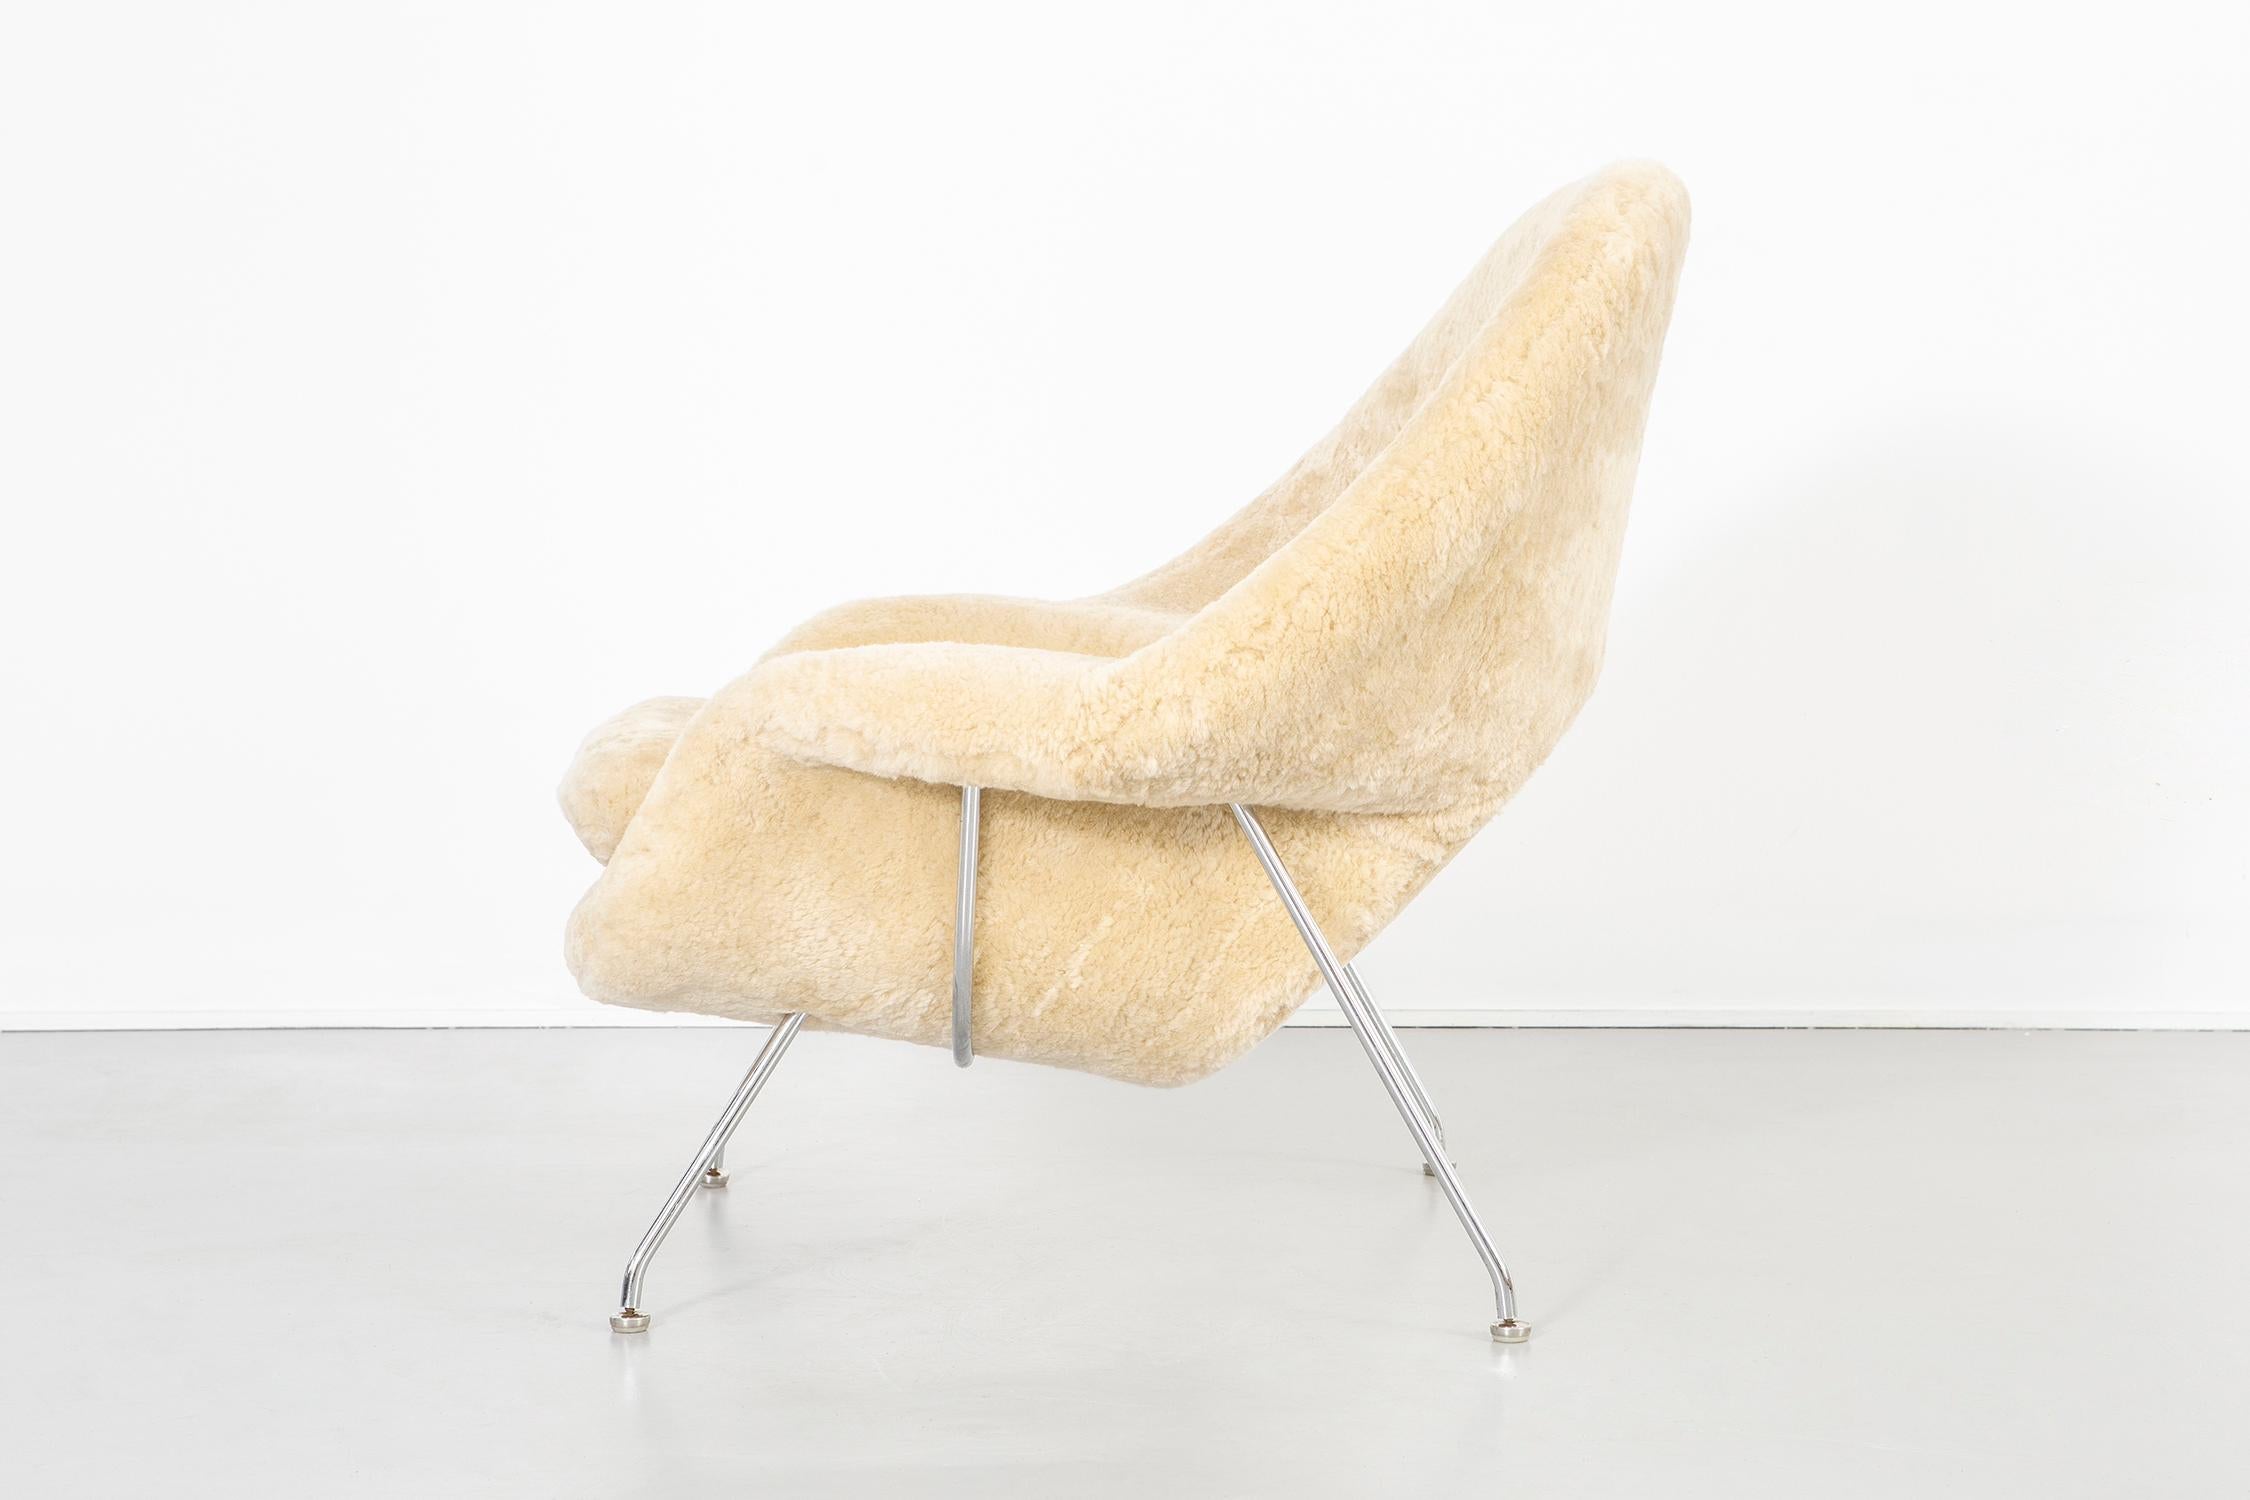 Mid-Century Modern Eero Saarinen for Knoll Womb Chair Reupholstered in Shearling In Excellent Condition For Sale In Chicago, IL